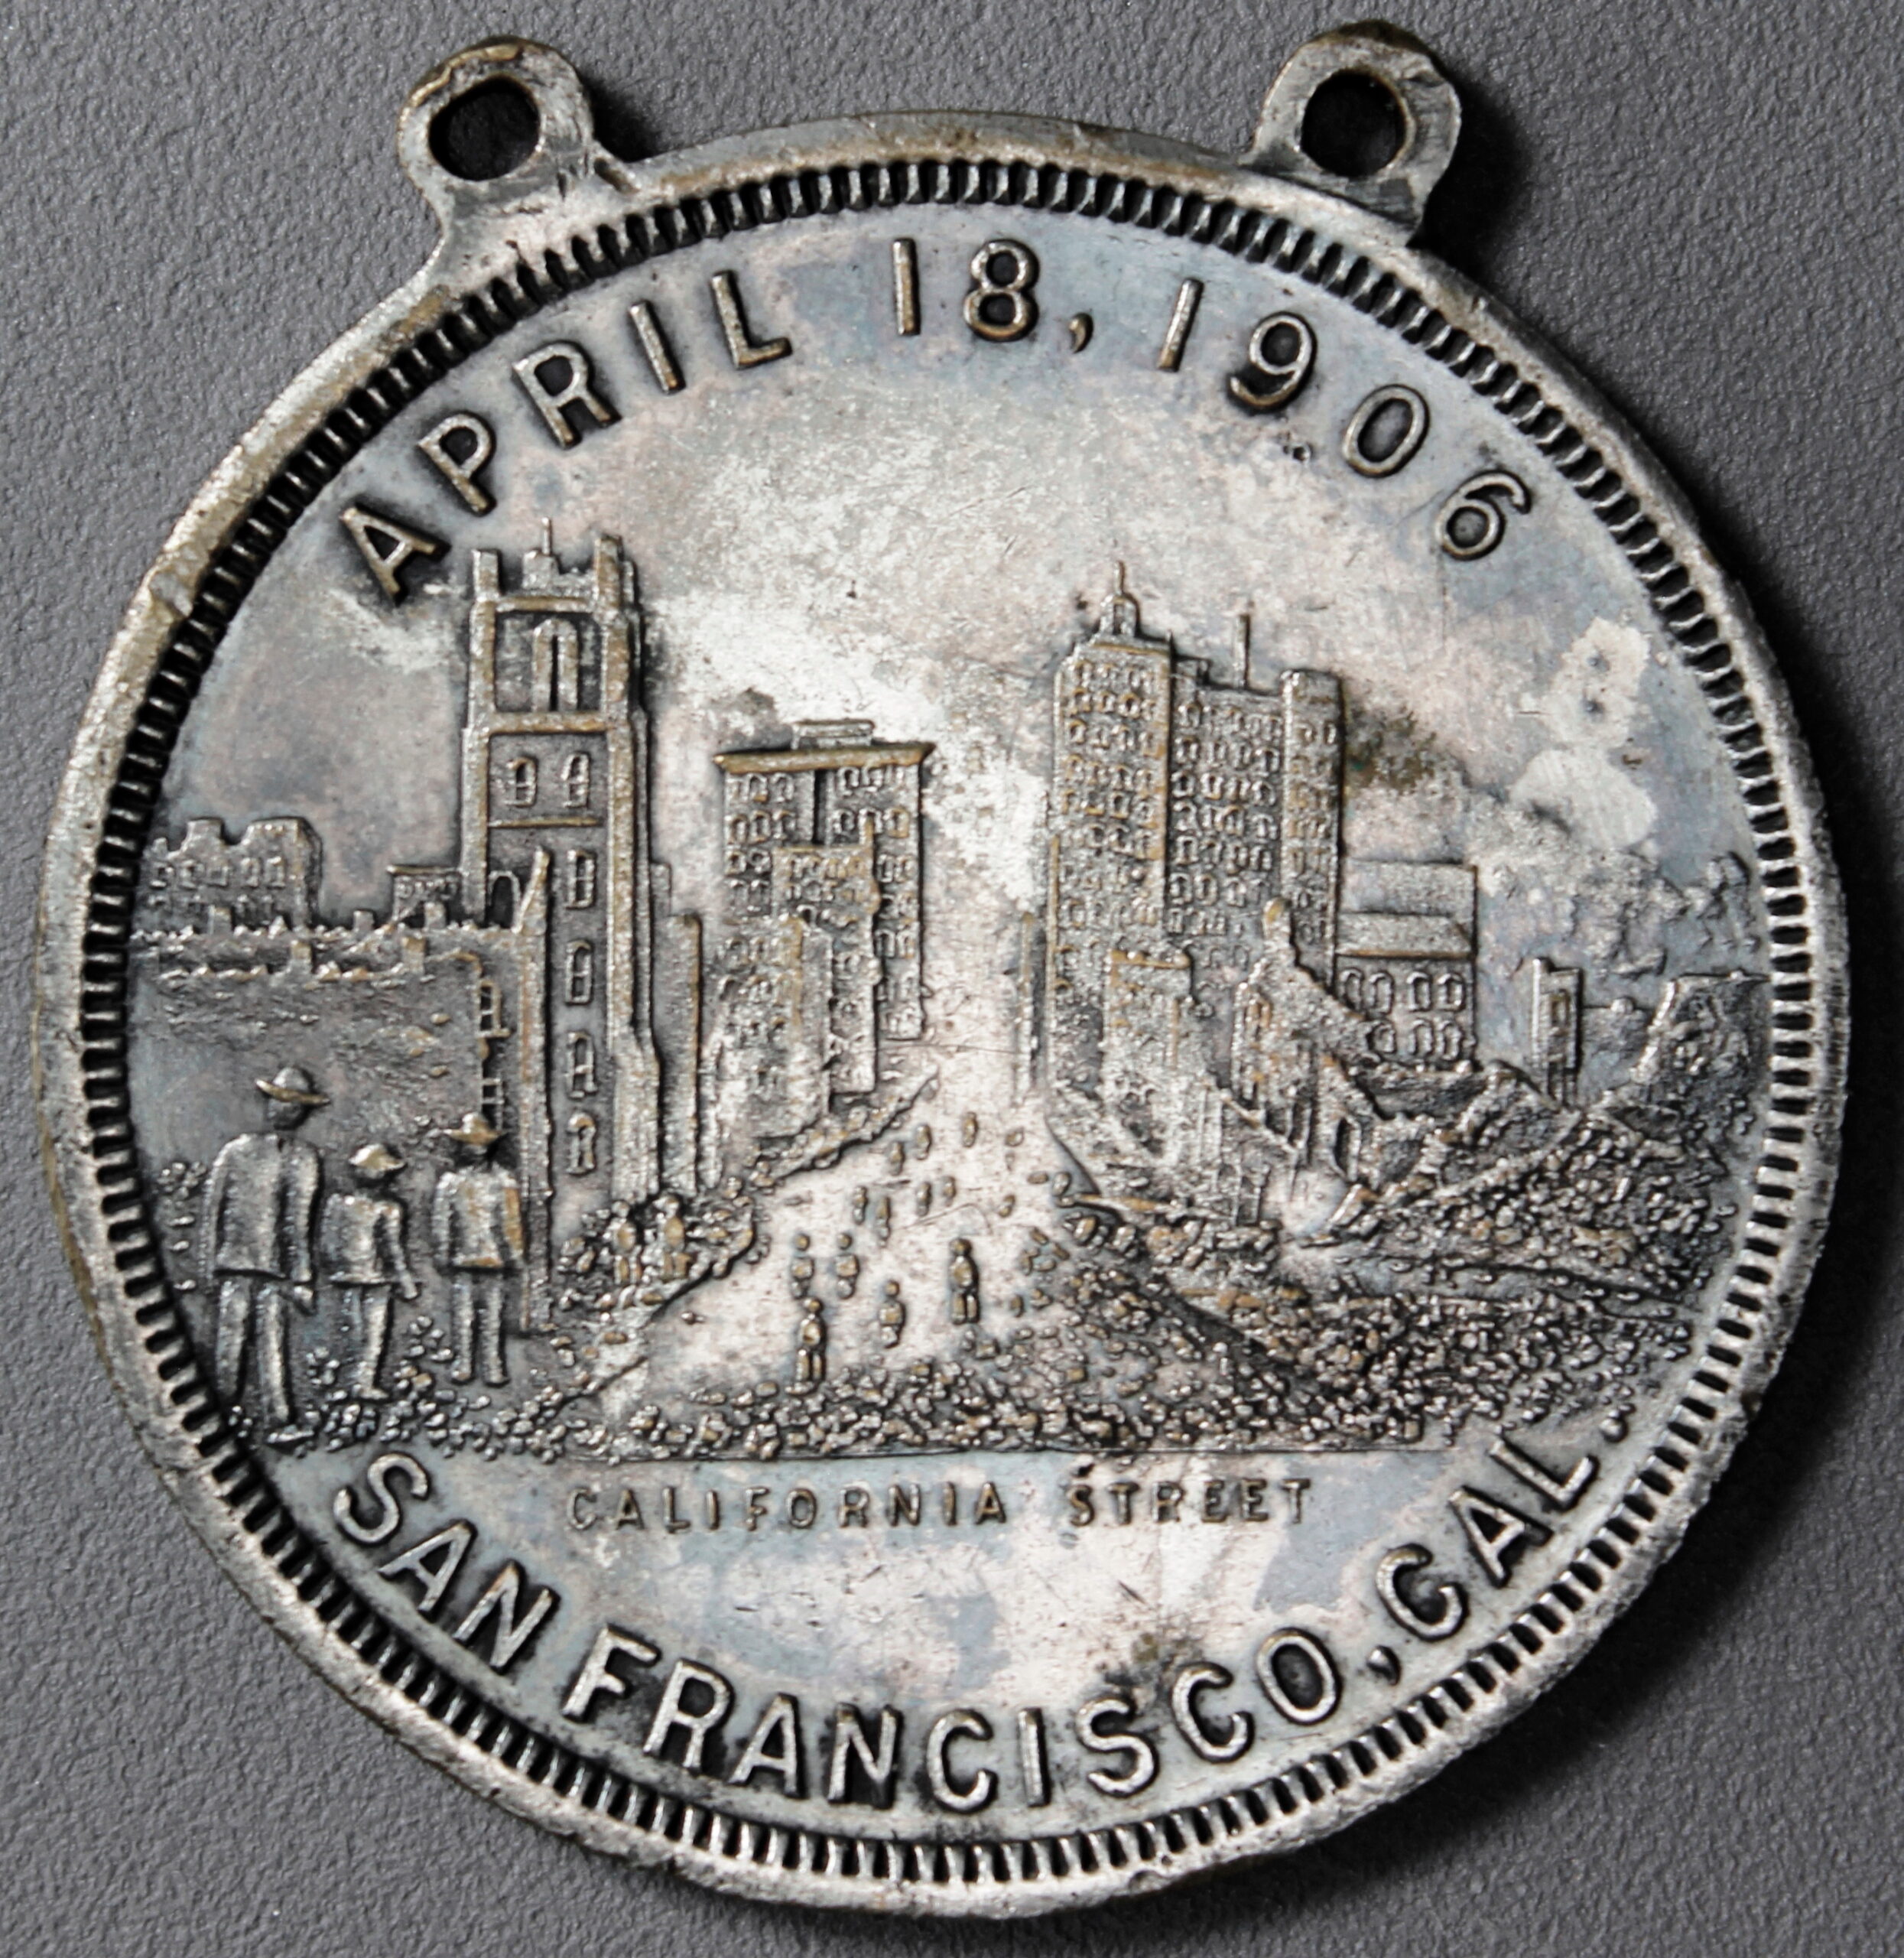 HK-340A 1906 San Francisco Disaster & Fire SCD – Silver Plated – variety not listed in H&K